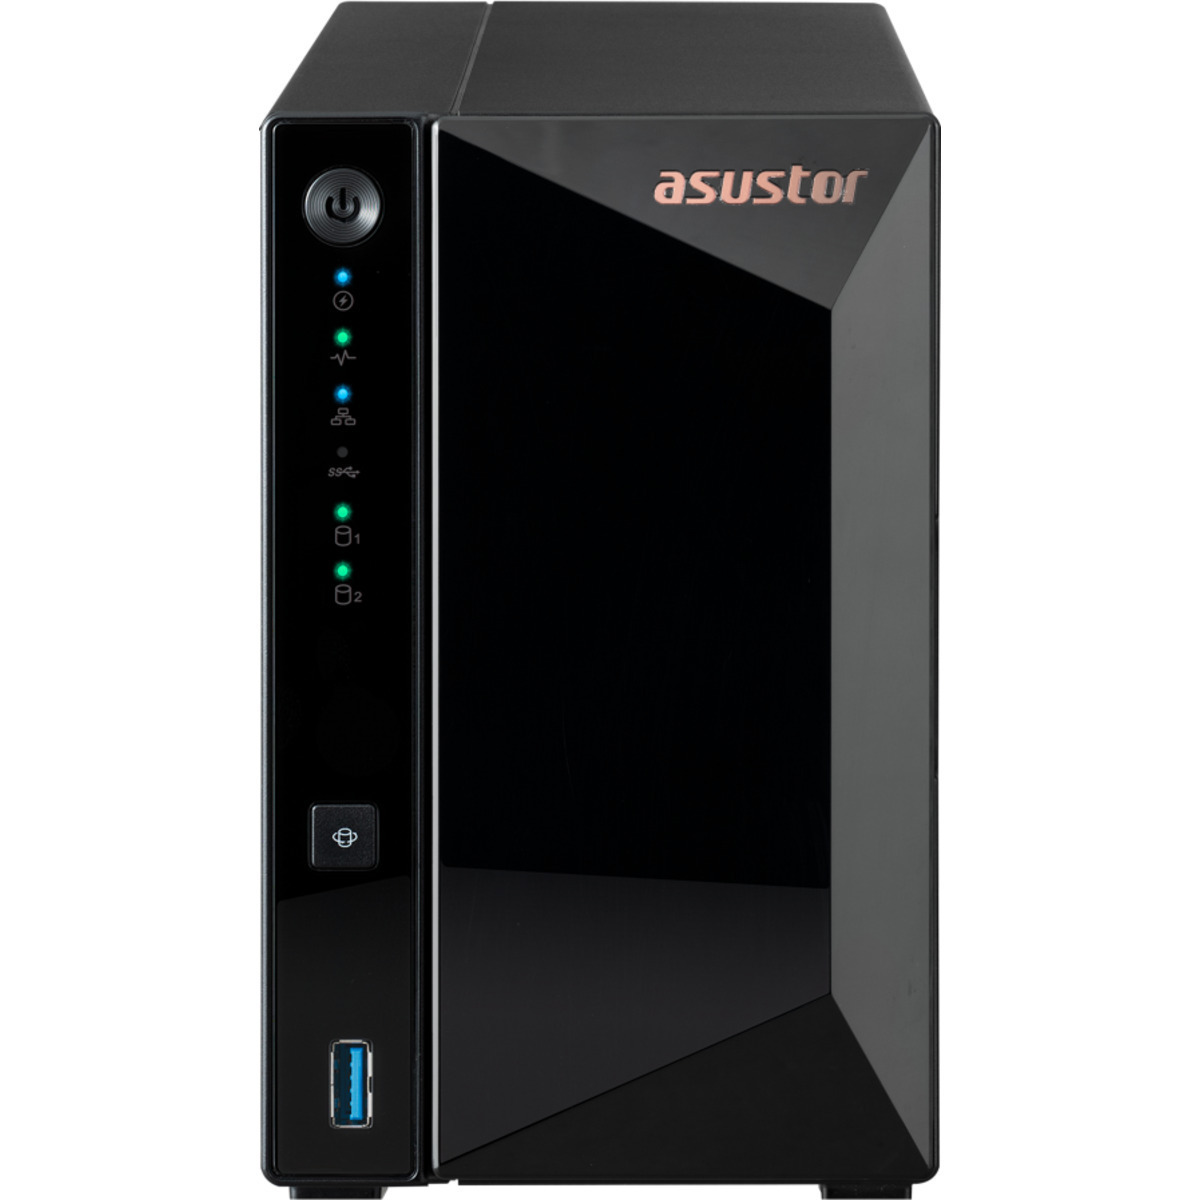 ASUSTOR DRIVESTOR 2 Pro Gen2 AS3302T v2 8tb 2-Bay Desktop Personal / Basic Home / Small Office NAS - Network Attached Storage Device 2x4tb Western Digital Red Plus WD40EFPX 3.5 5400rpm SATA 6Gb/s HDD NAS Class Drives Installed - Burn-In Tested - ON SALE DRIVESTOR 2 Pro Gen2 AS3302T v2